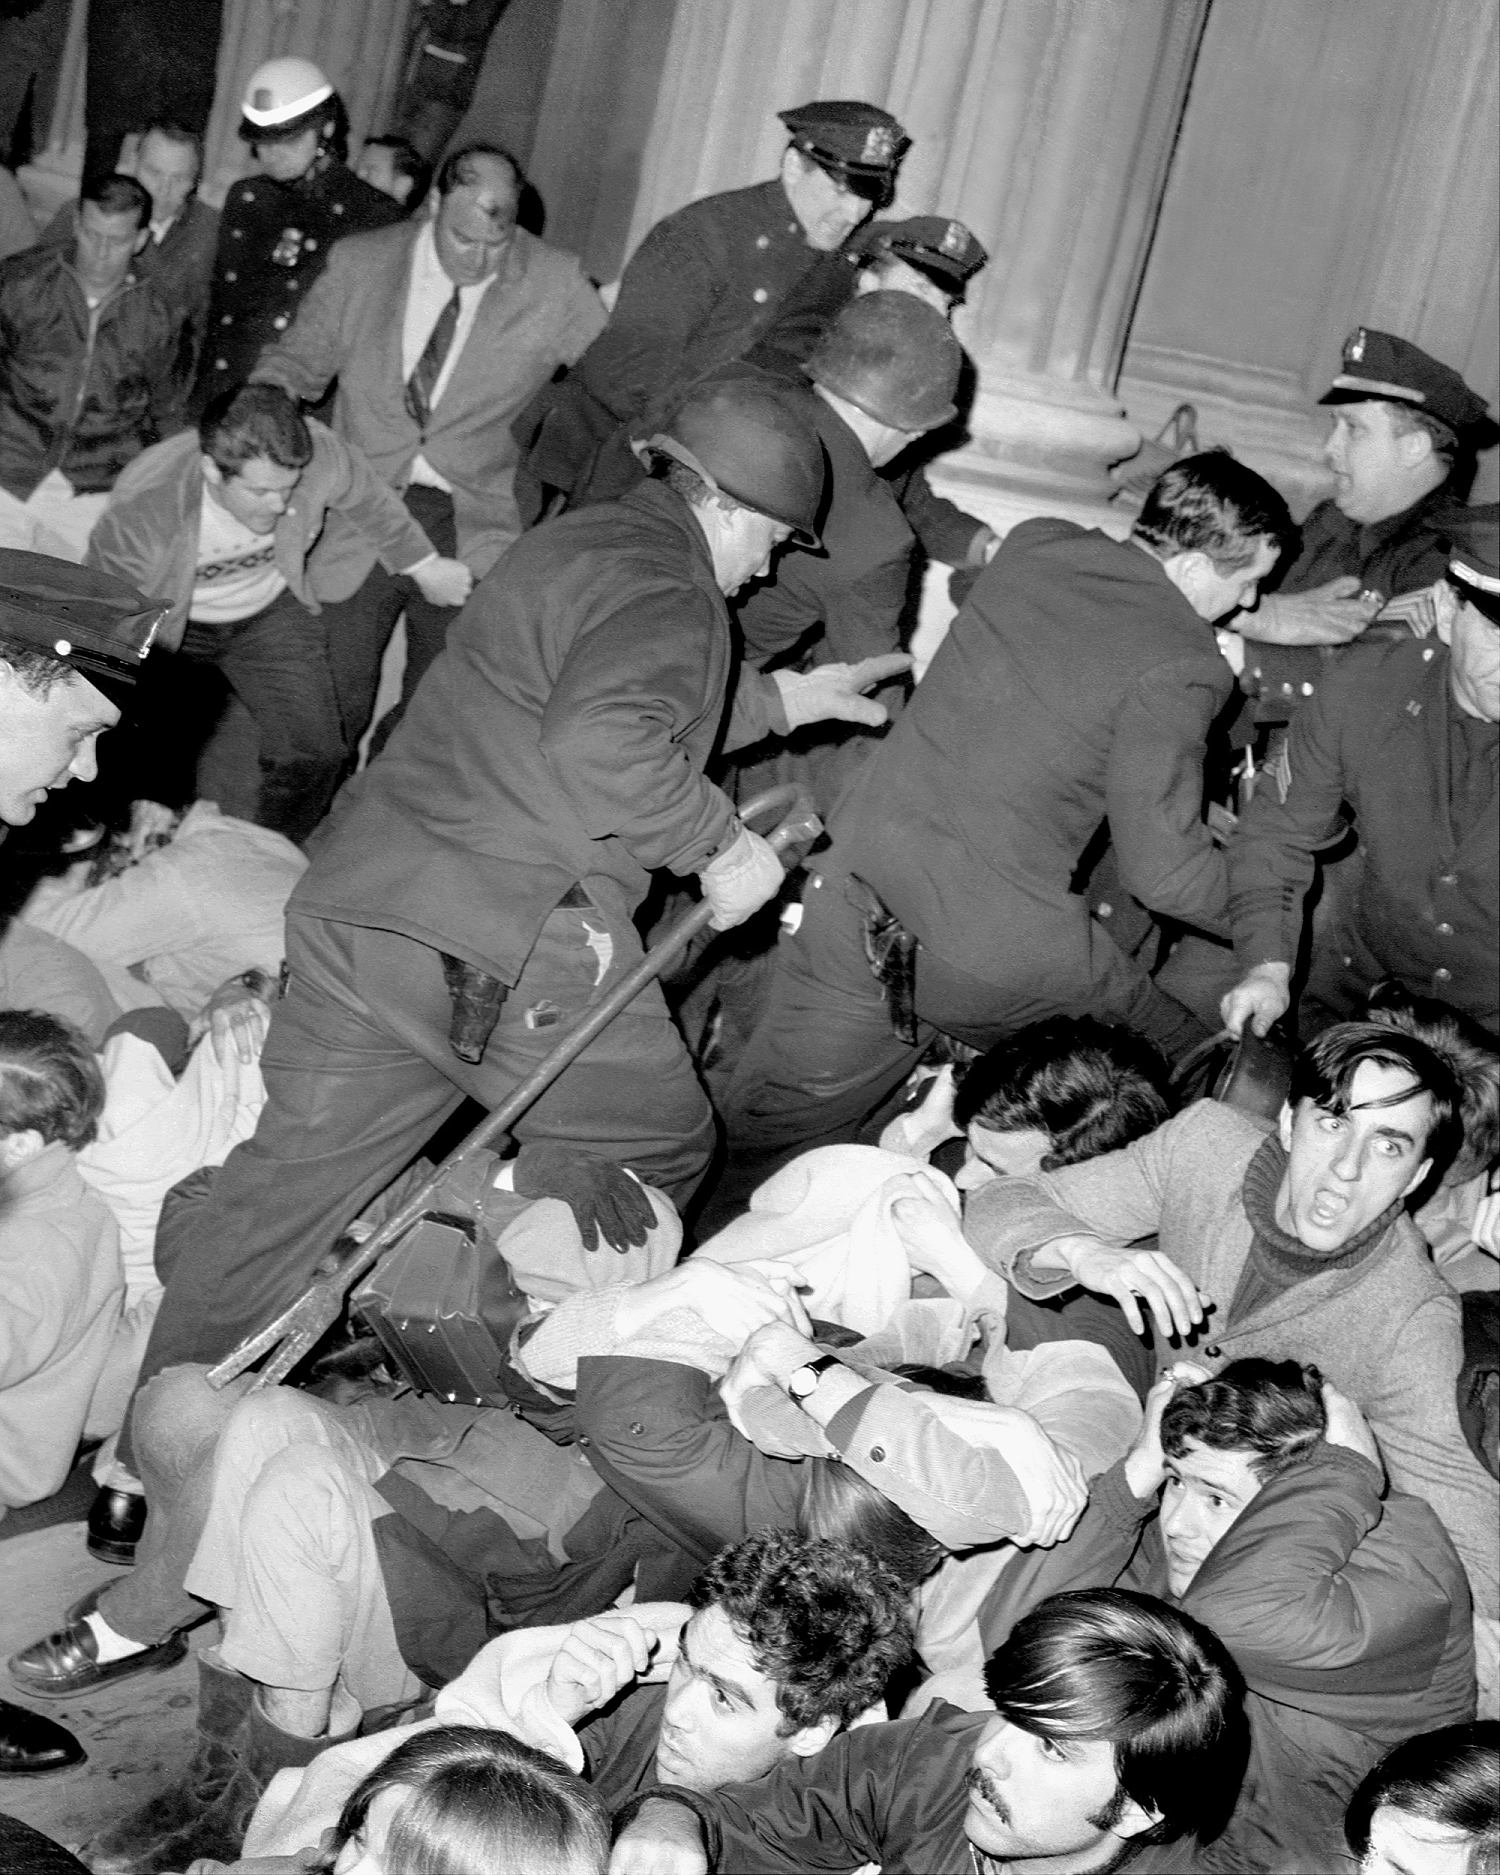 Columbia unrest echoes chaotic campus protest movement of 1968